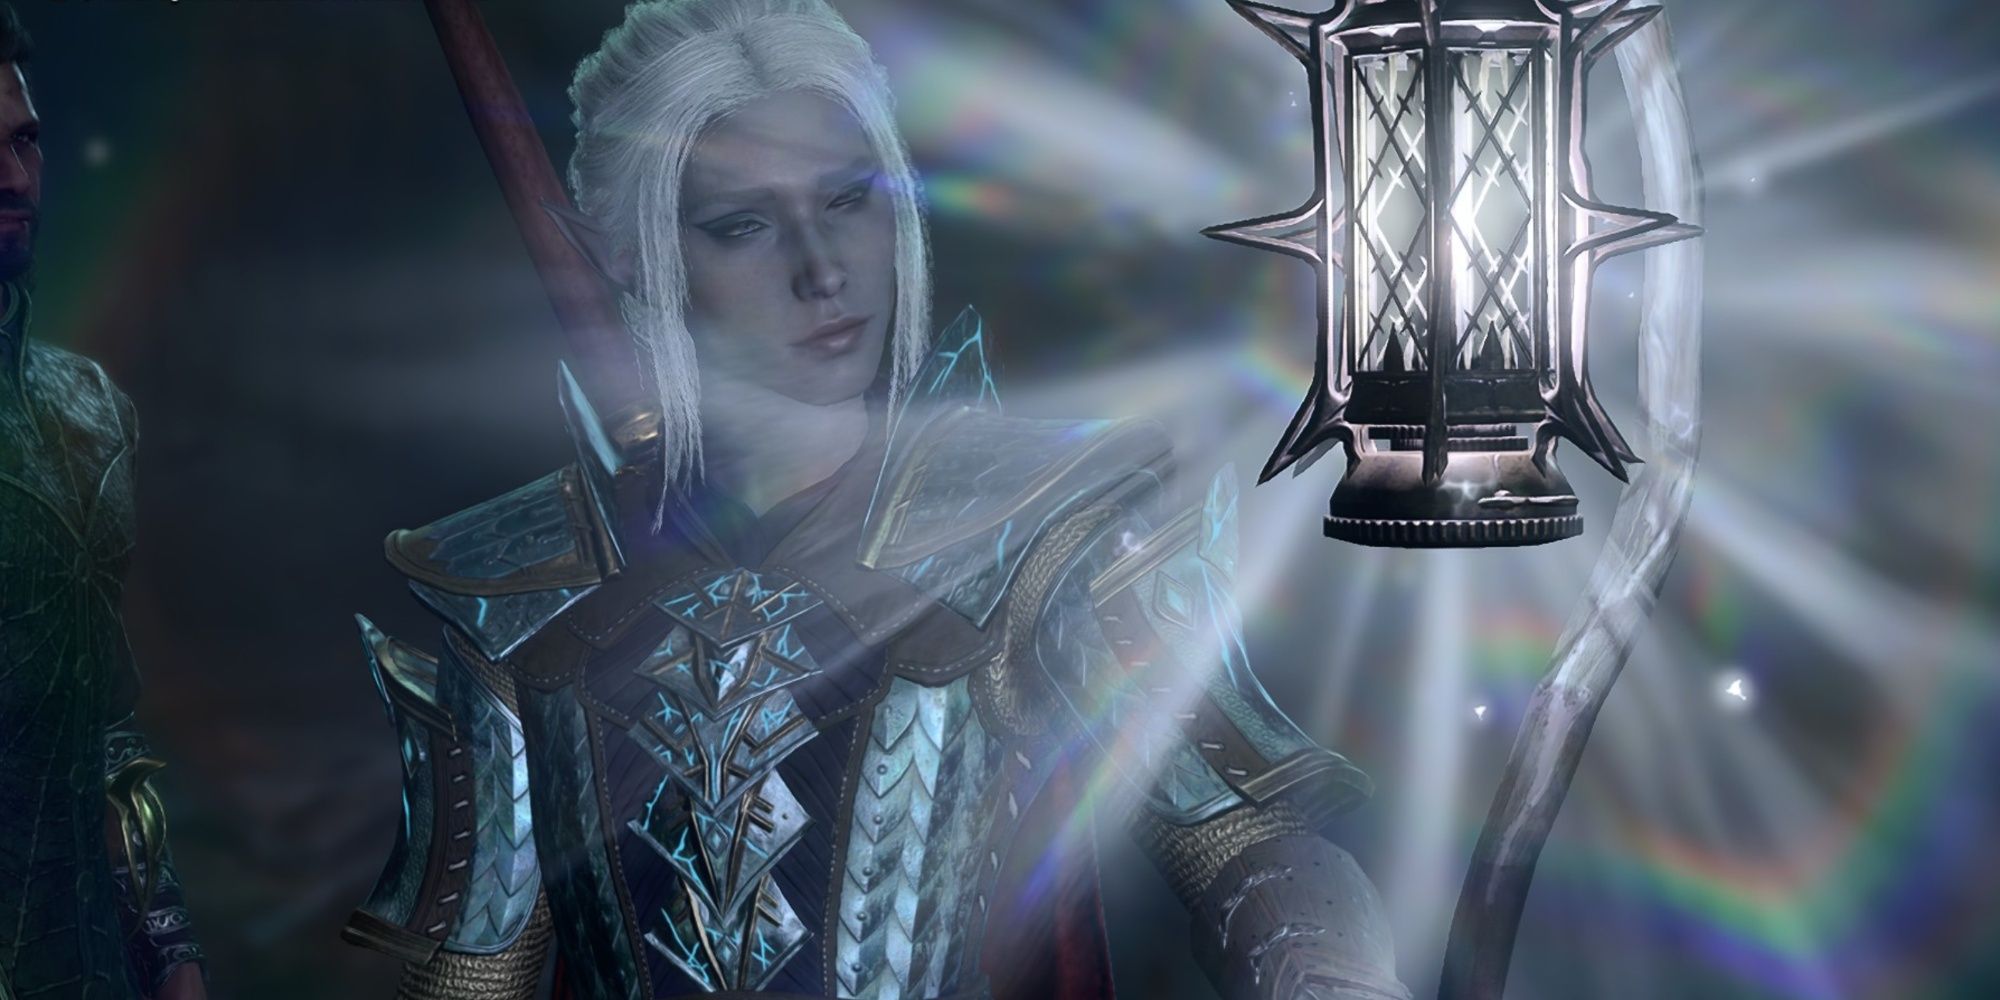 Drow Player In Adamantine Armor Inspects Curious New Moonlantern And Pixie